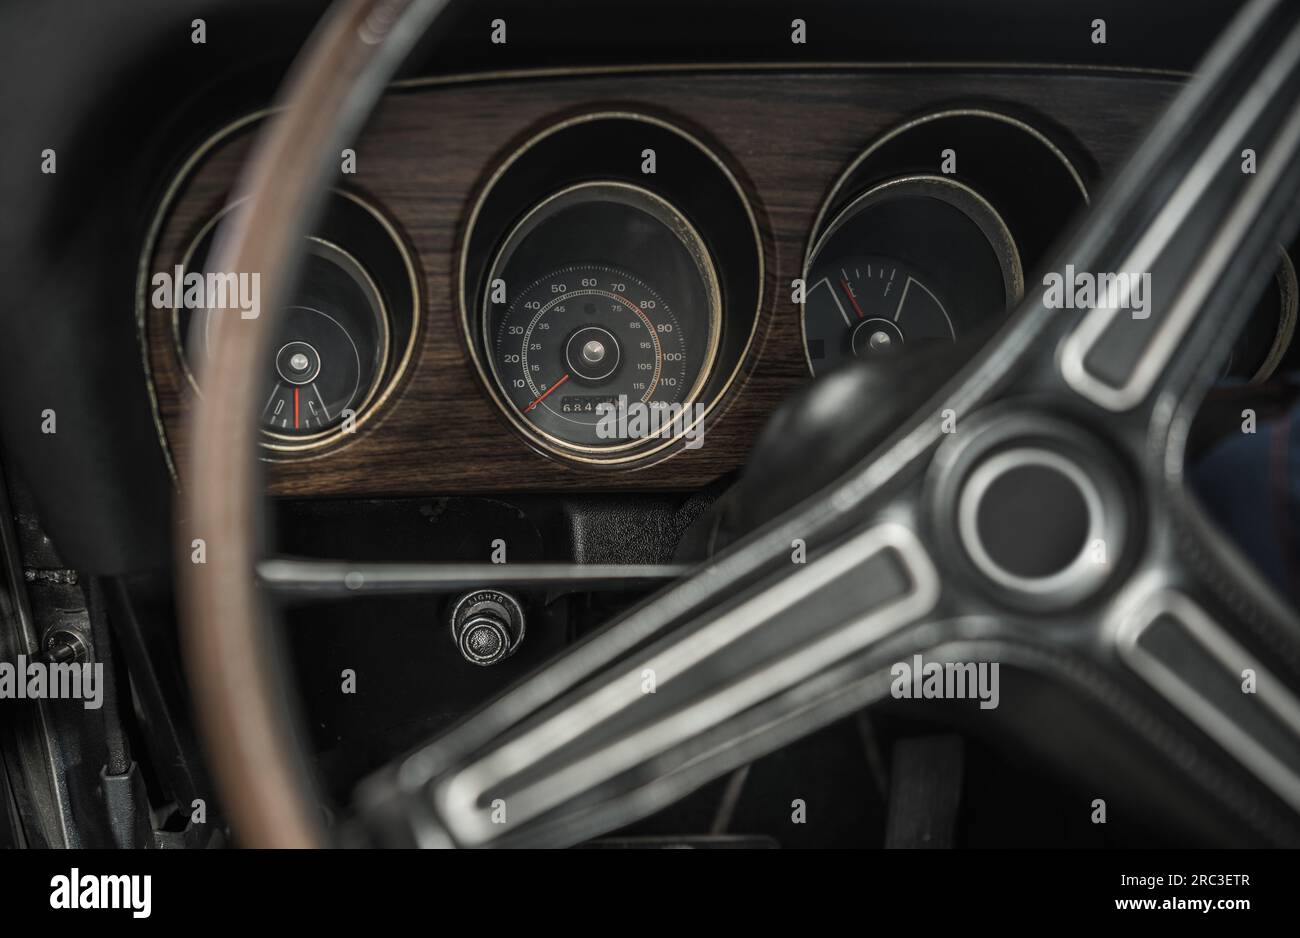 Classic Car Vintage Dashboard and Steering Wheel. Automotive History Theme. Stock Photo